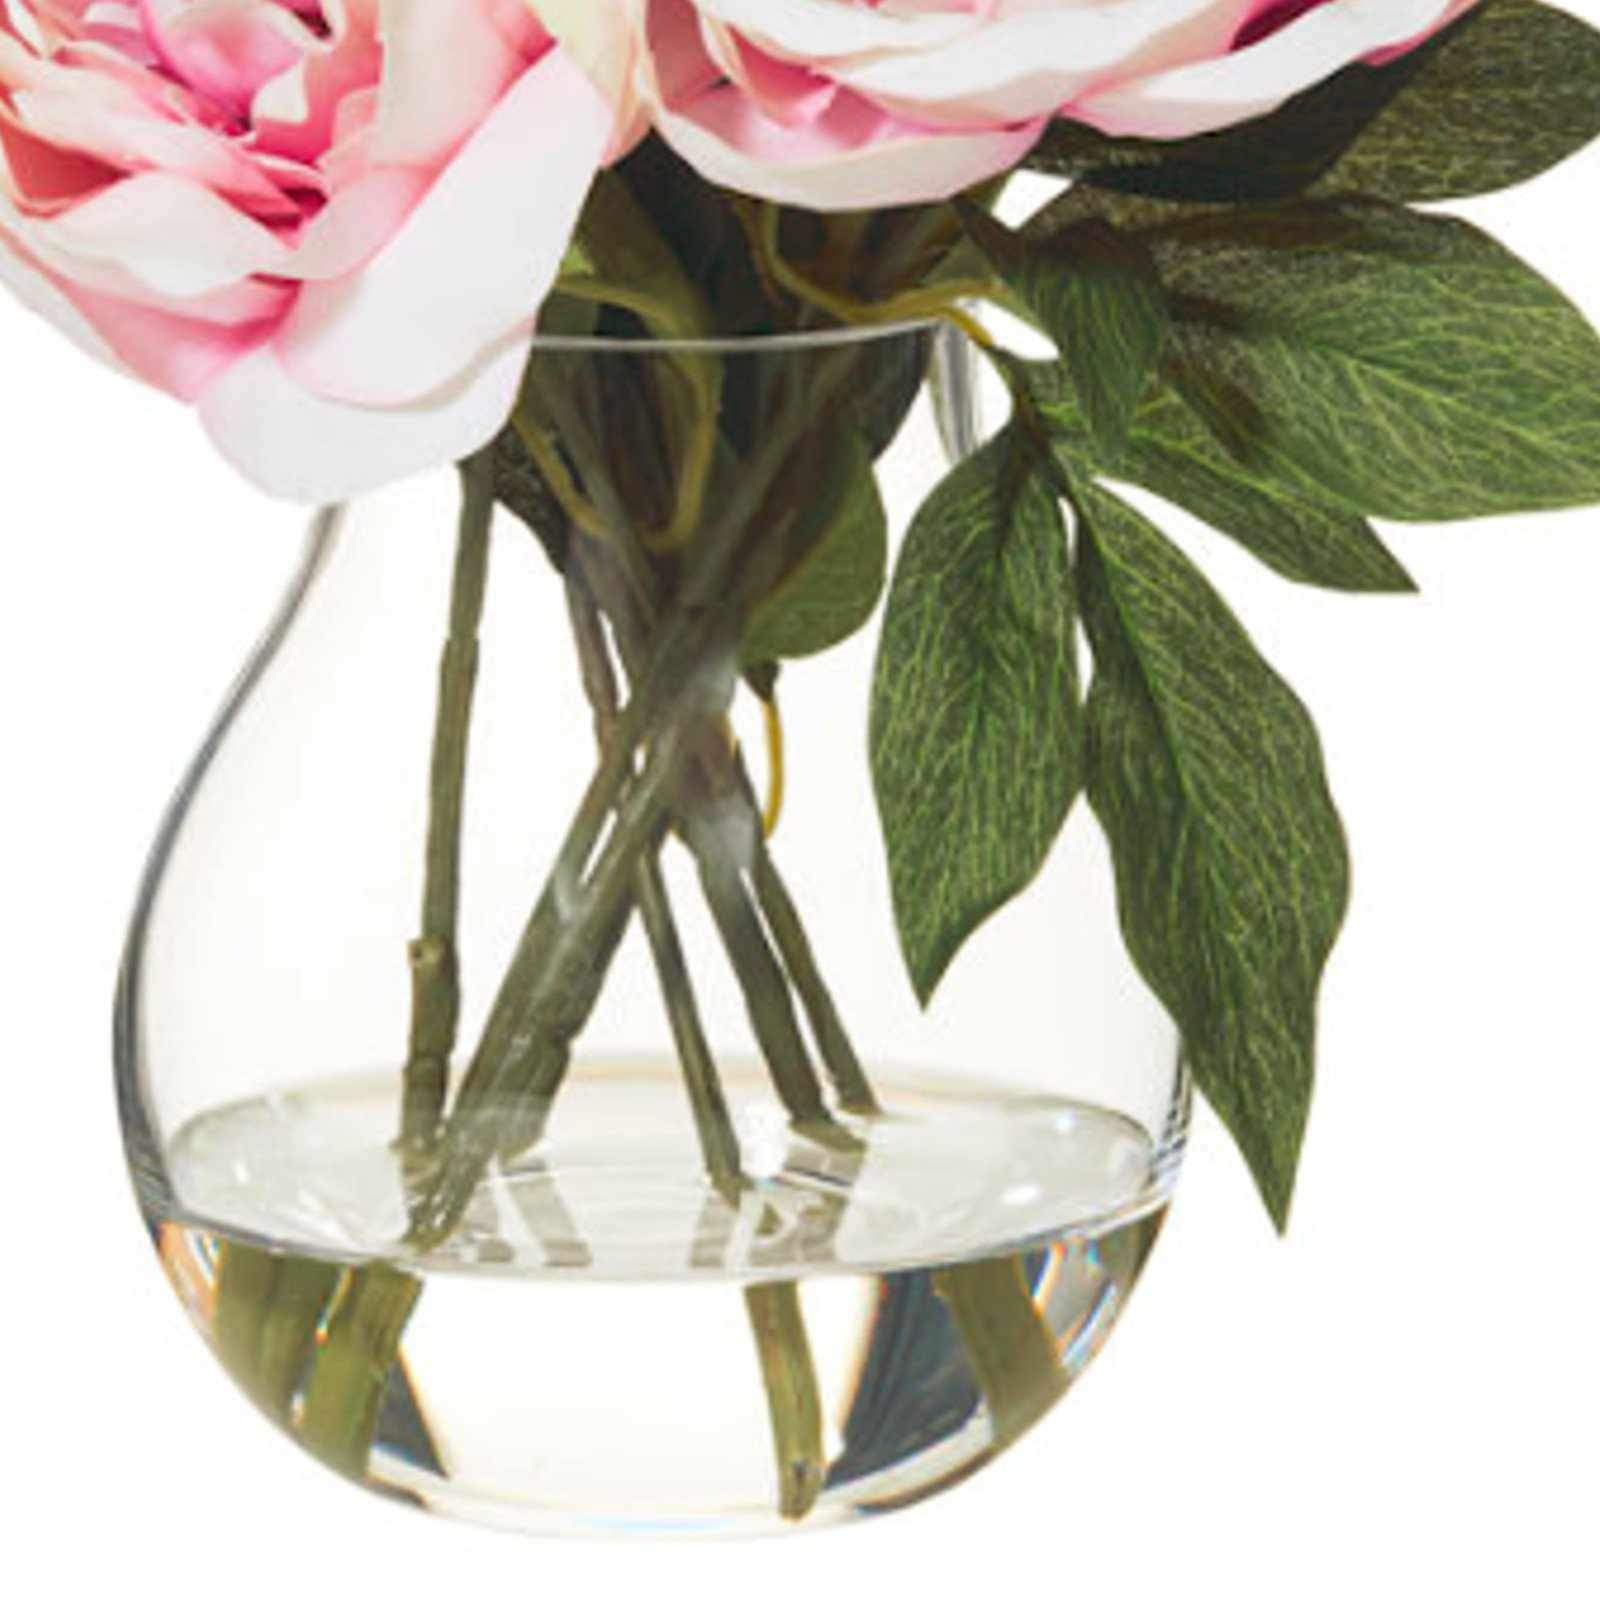 Peony Arrangement with Aria Vase - Artificial Flower Arrangement-artificial flowers and plants-Chef's Quality Cookware